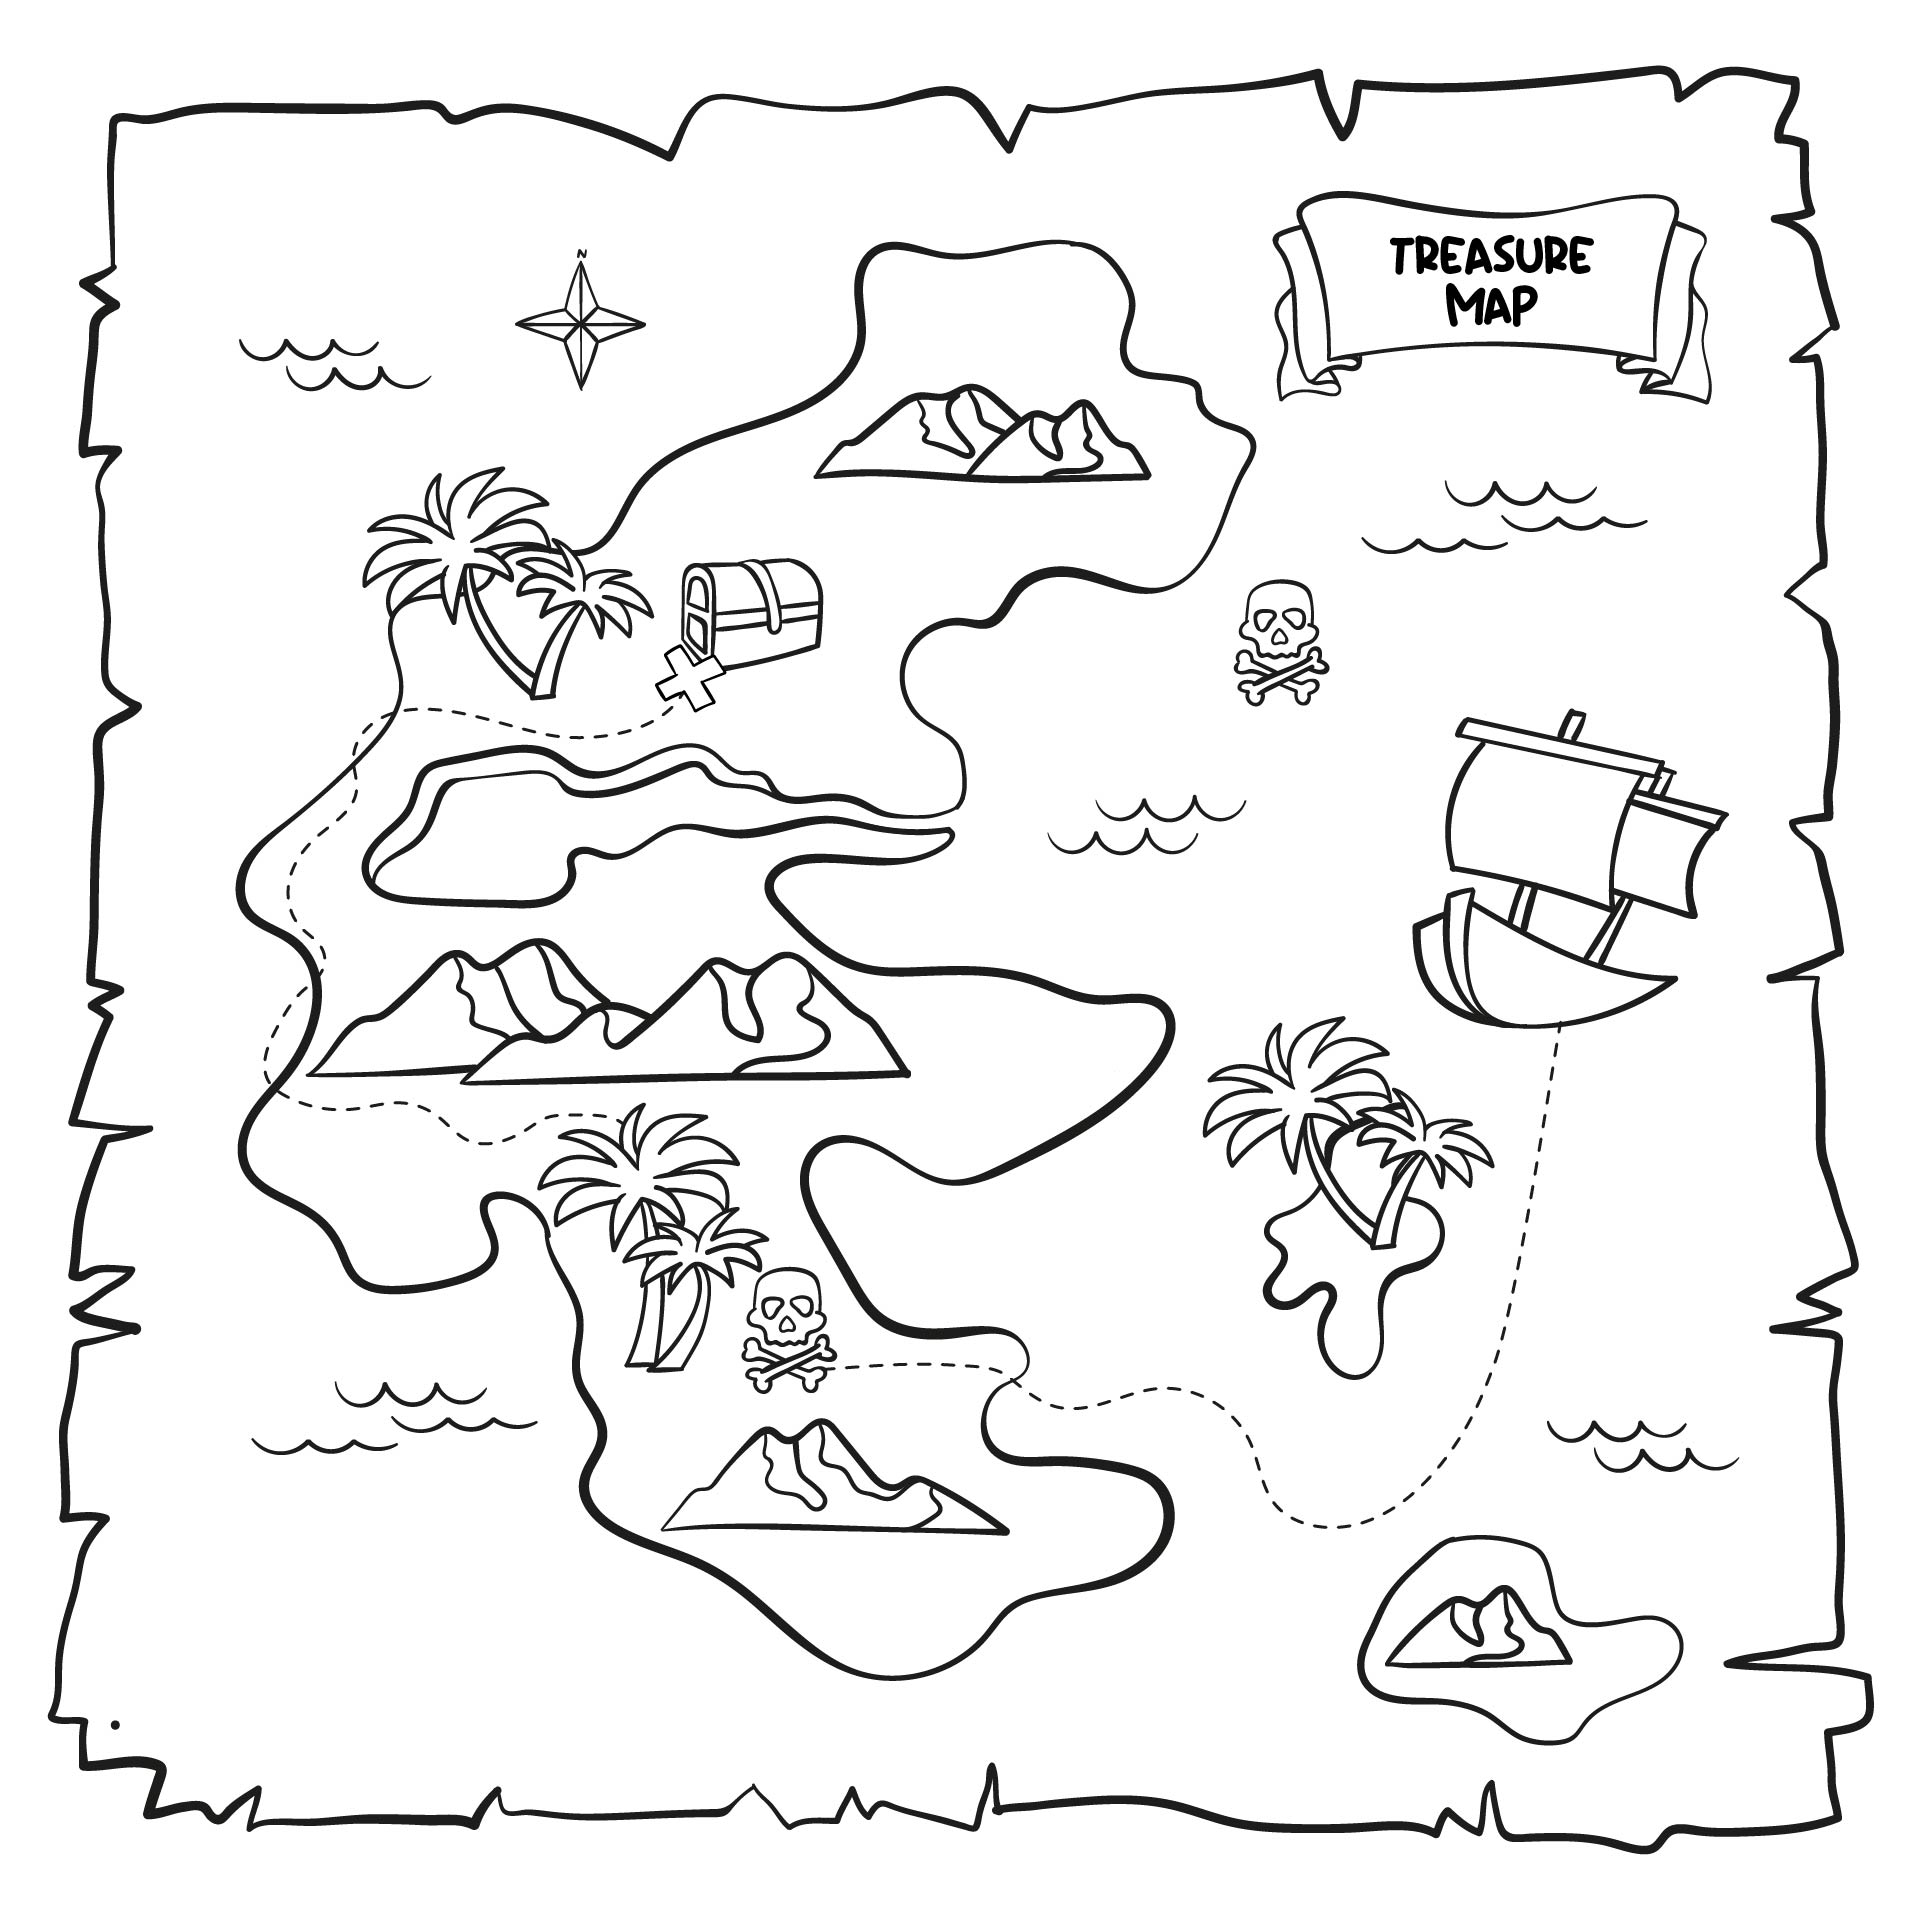 7 Best Images of Printable Pirate Map Template - Printable Pirate ...